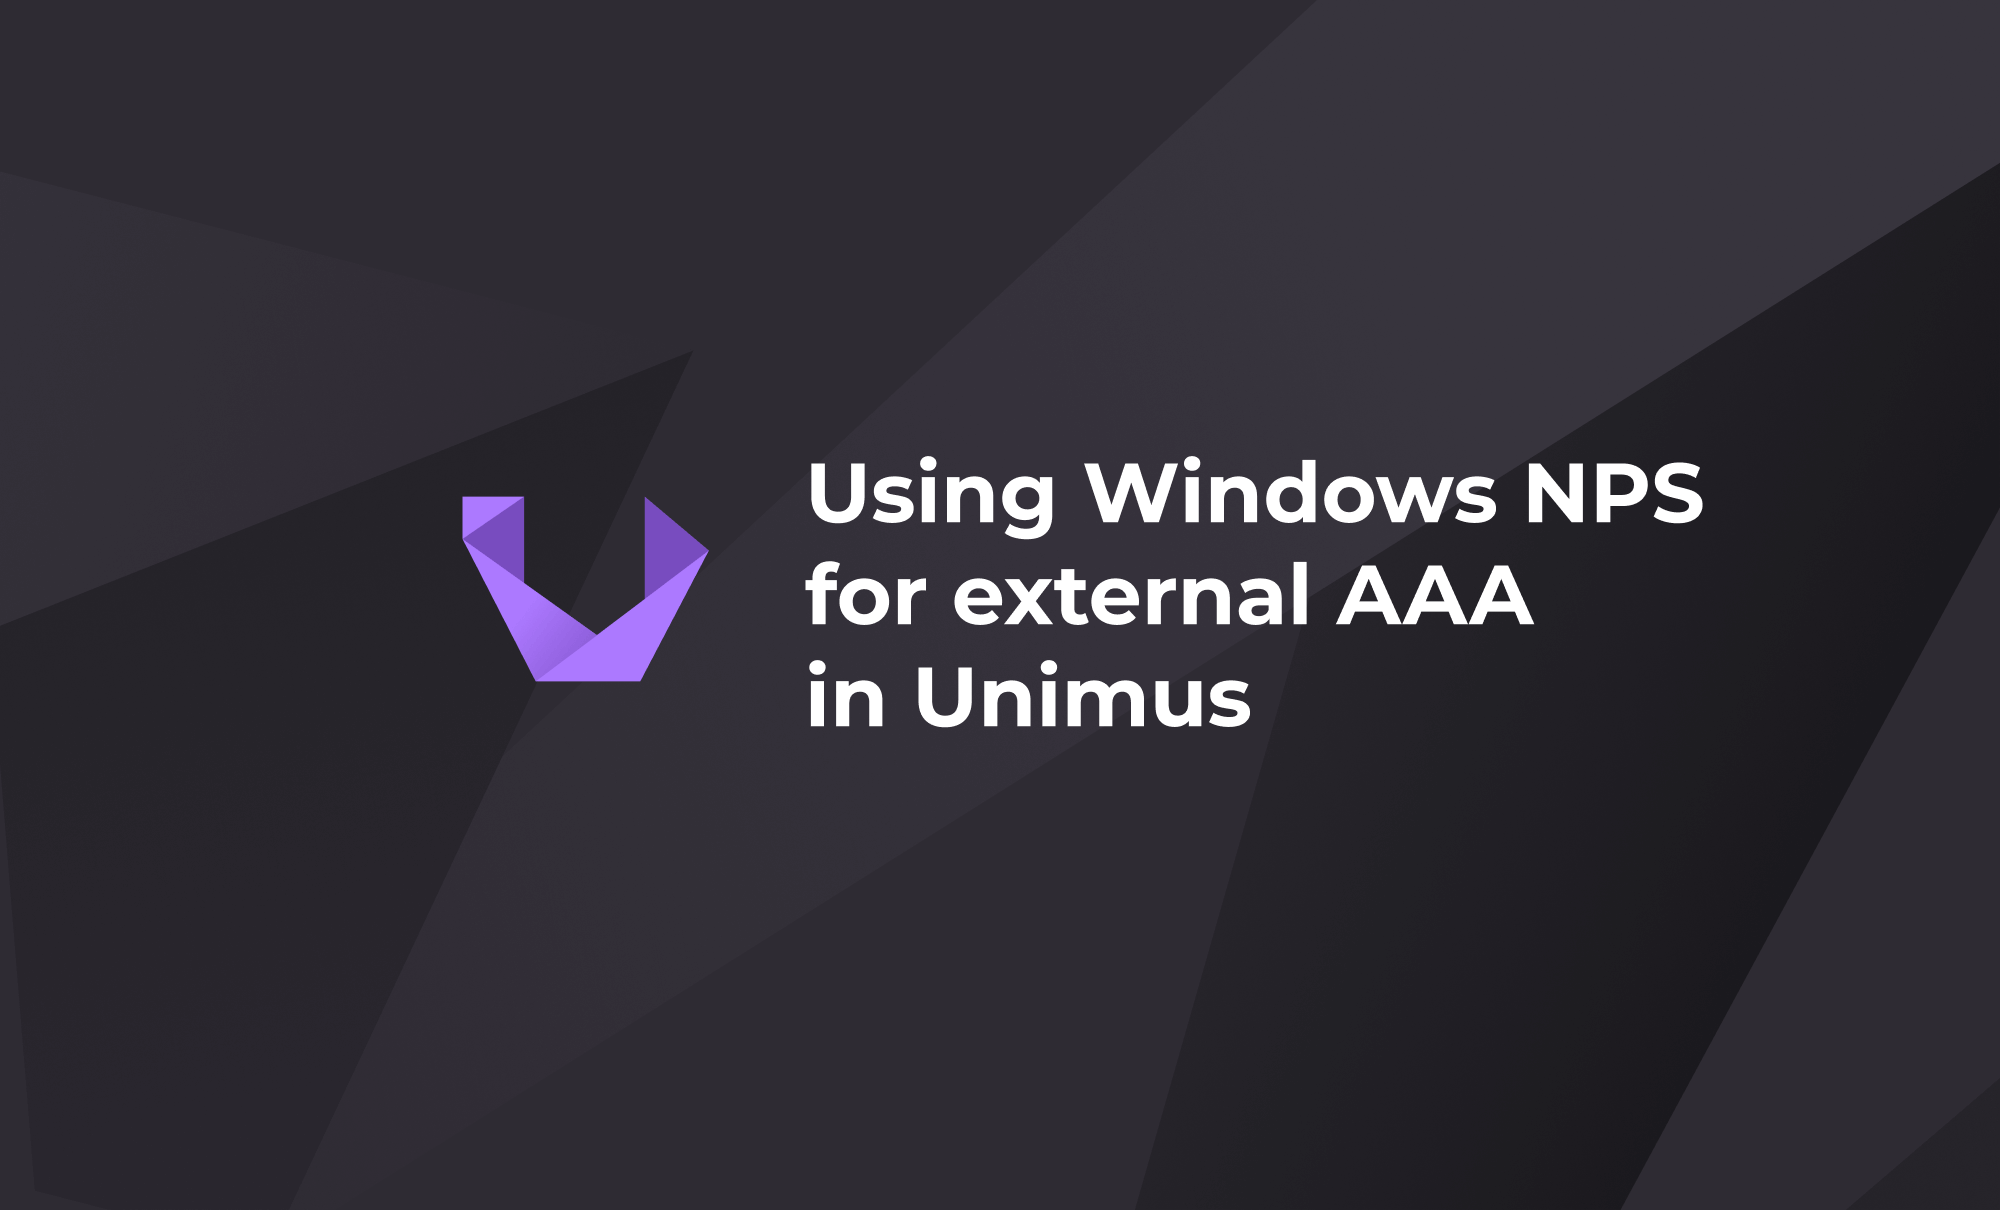 Using Windows NPS for external AAA in Unimus